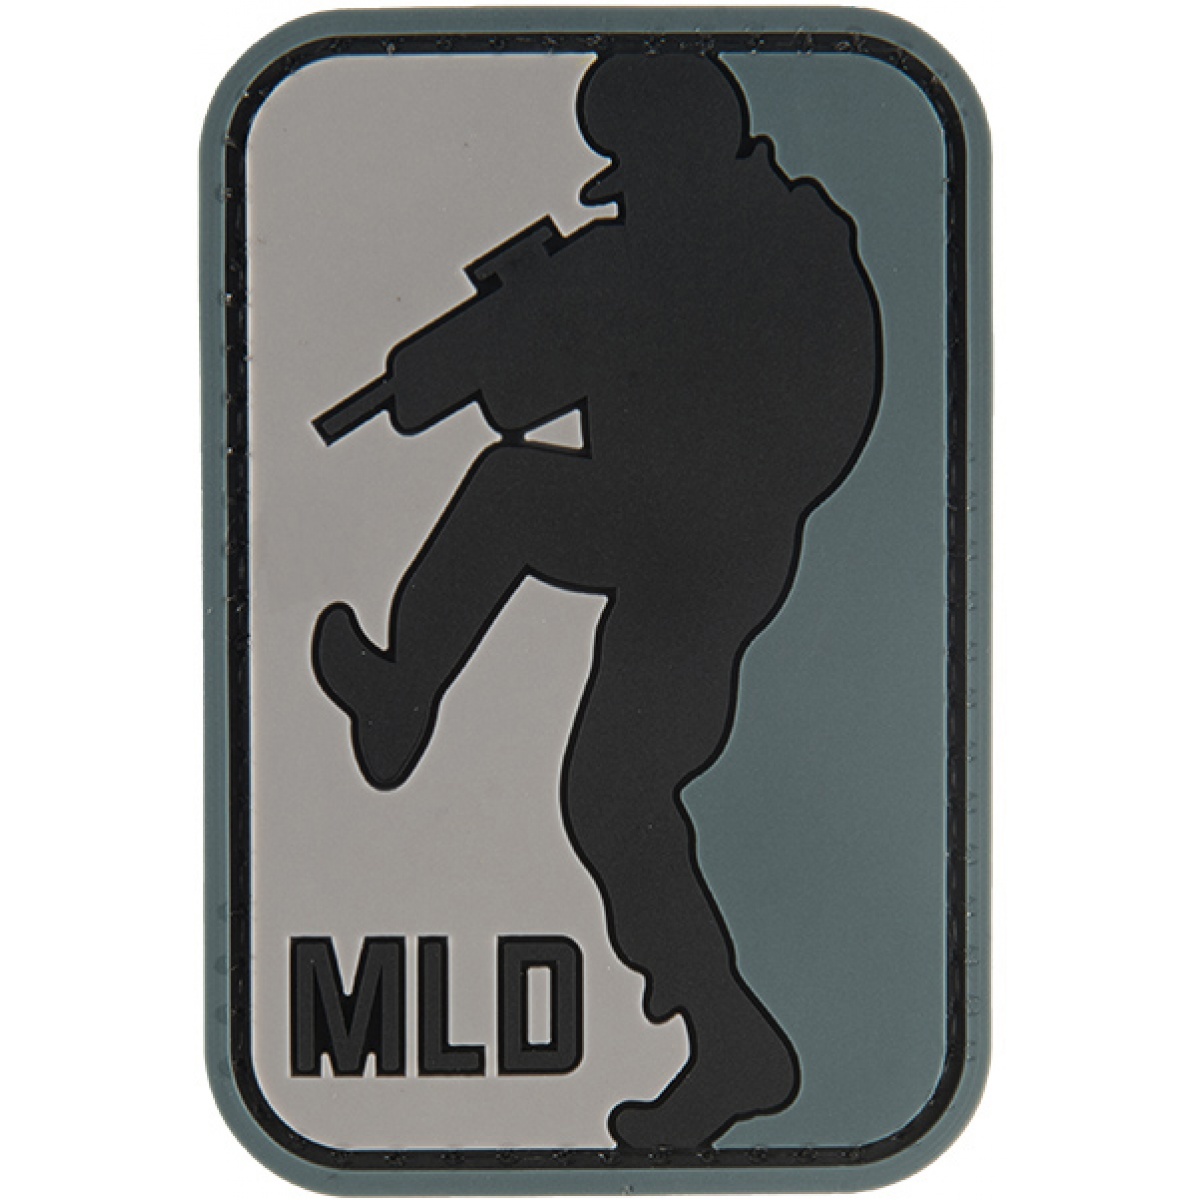 Major League Doorkicker Patch Airsoft Paintball Military Tactical 